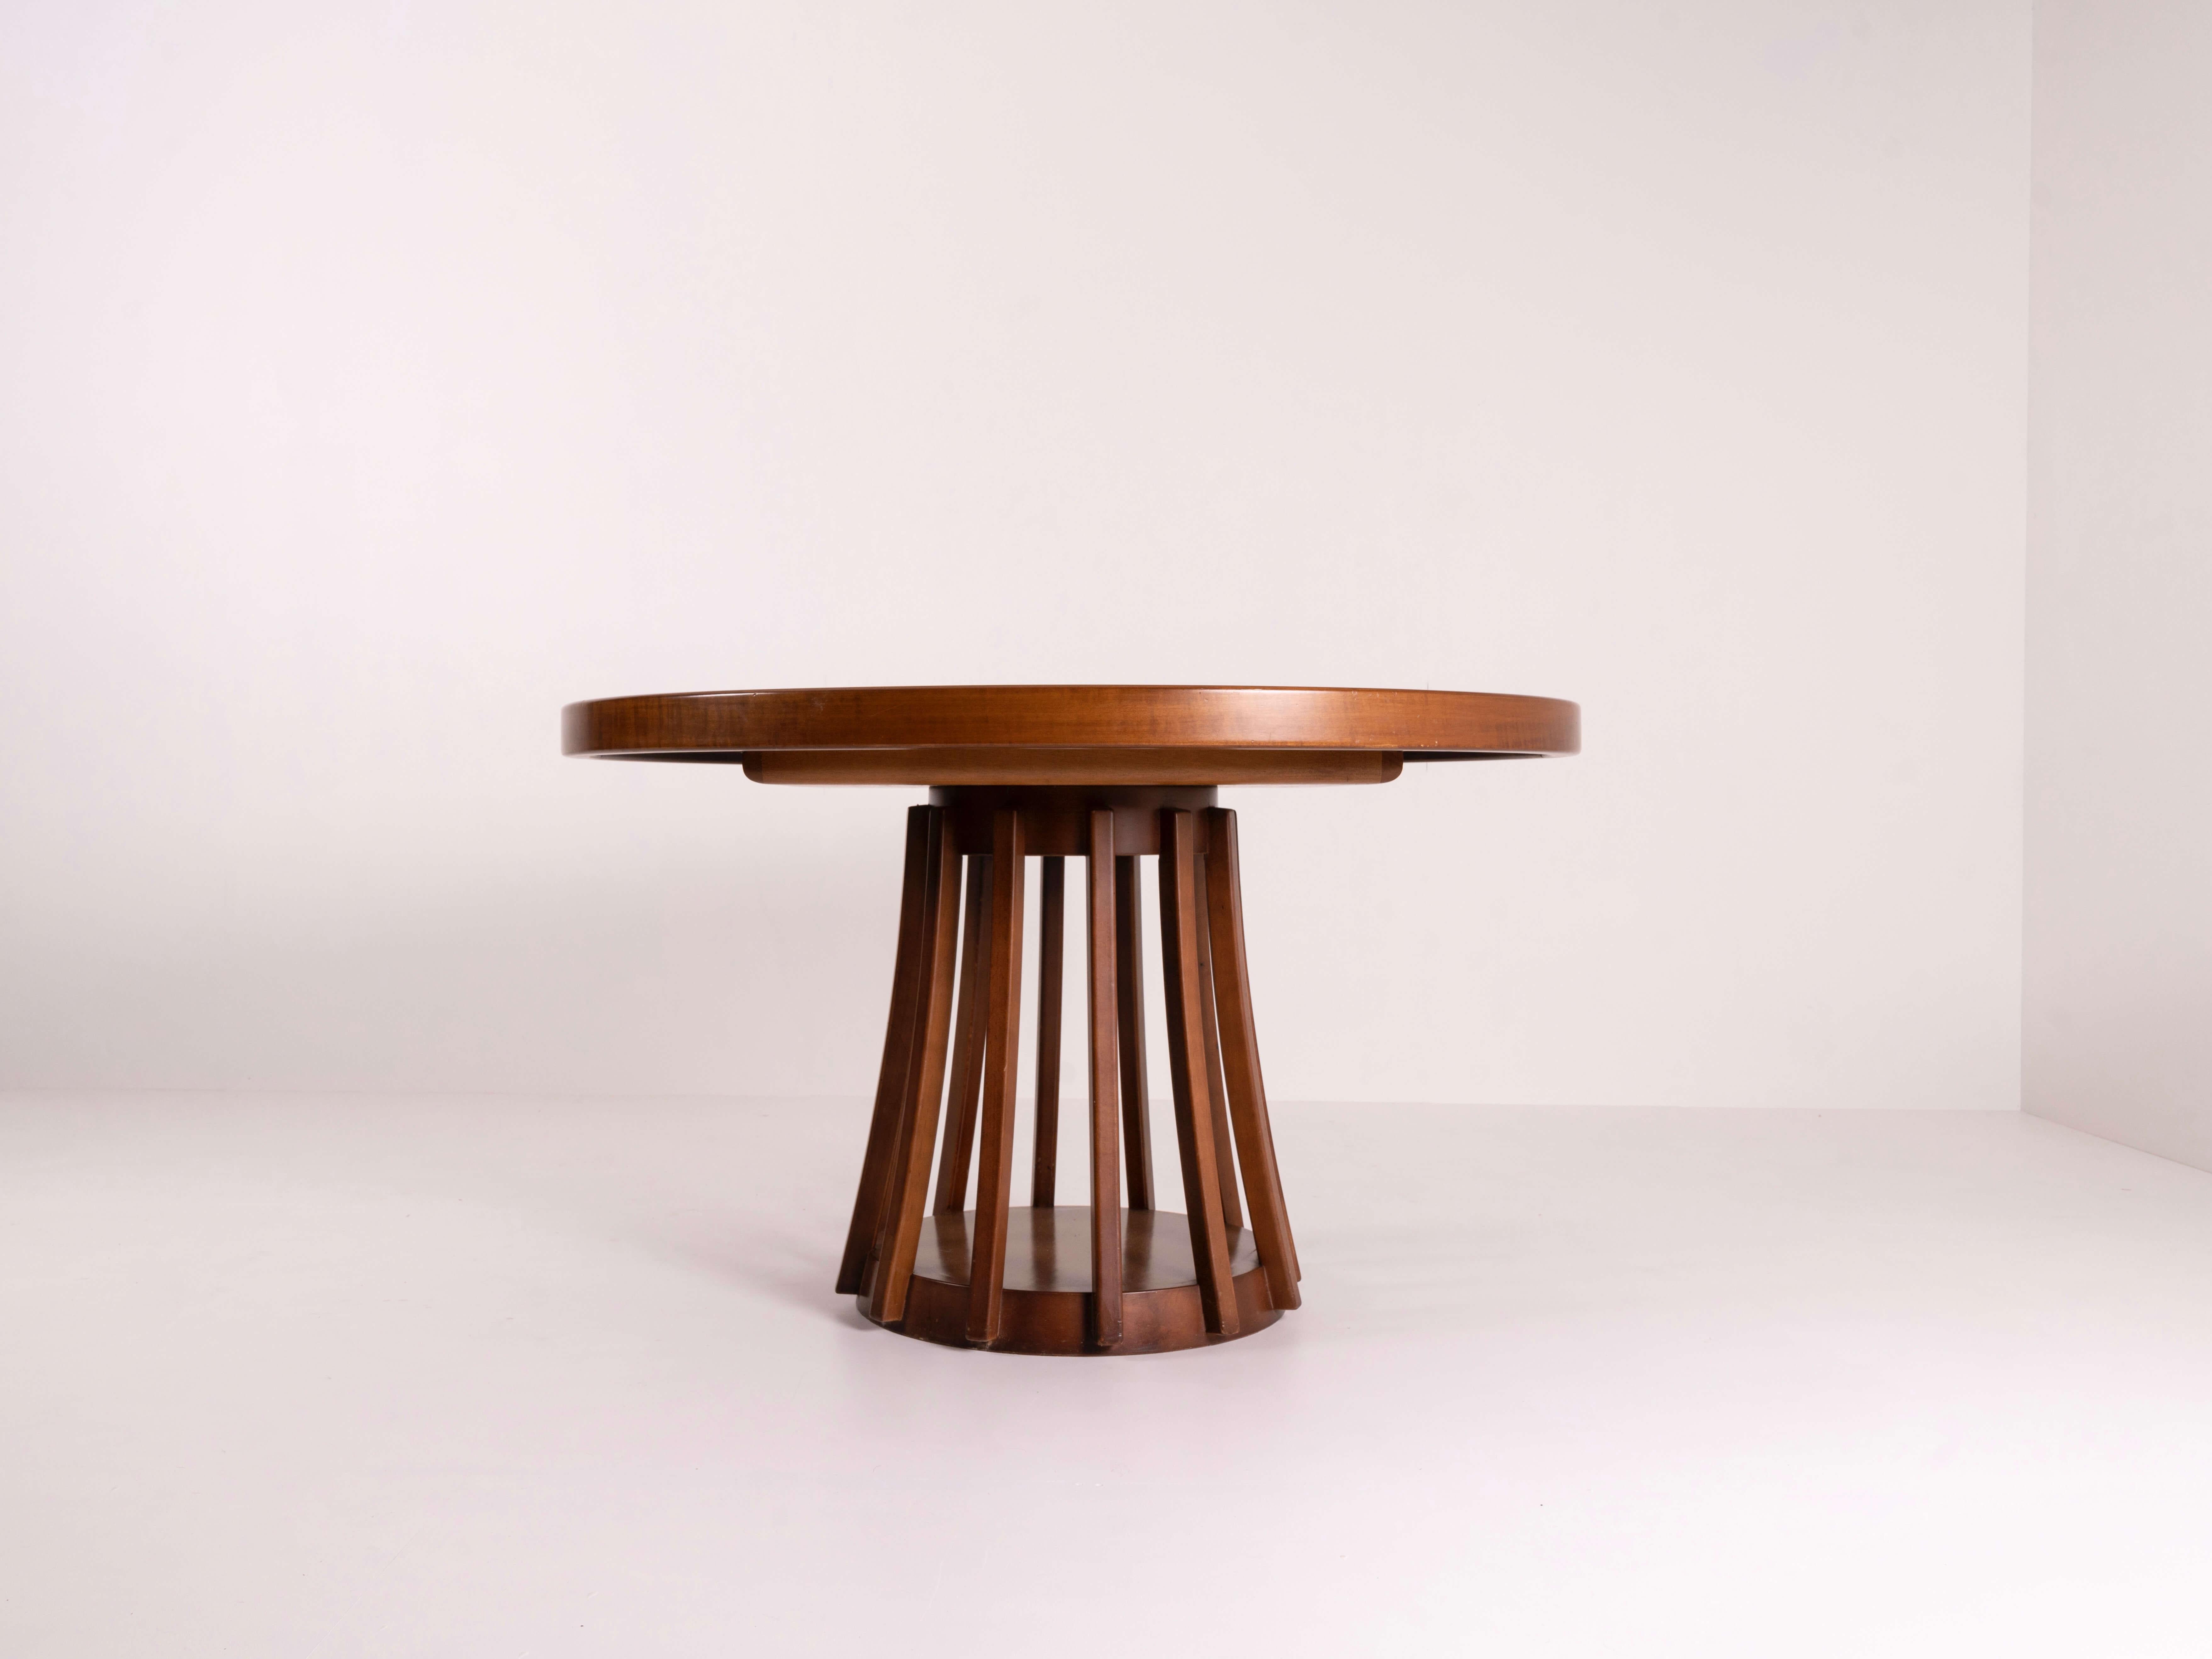 Beautiful Angelo Mangiarotti extendable round dining table in walnut veneer from Italy ca 1970s. The table with model S11 is from the Programma series by Sorgente Dei Nobili. It is extendable with a piece that is hidden within the table with a very